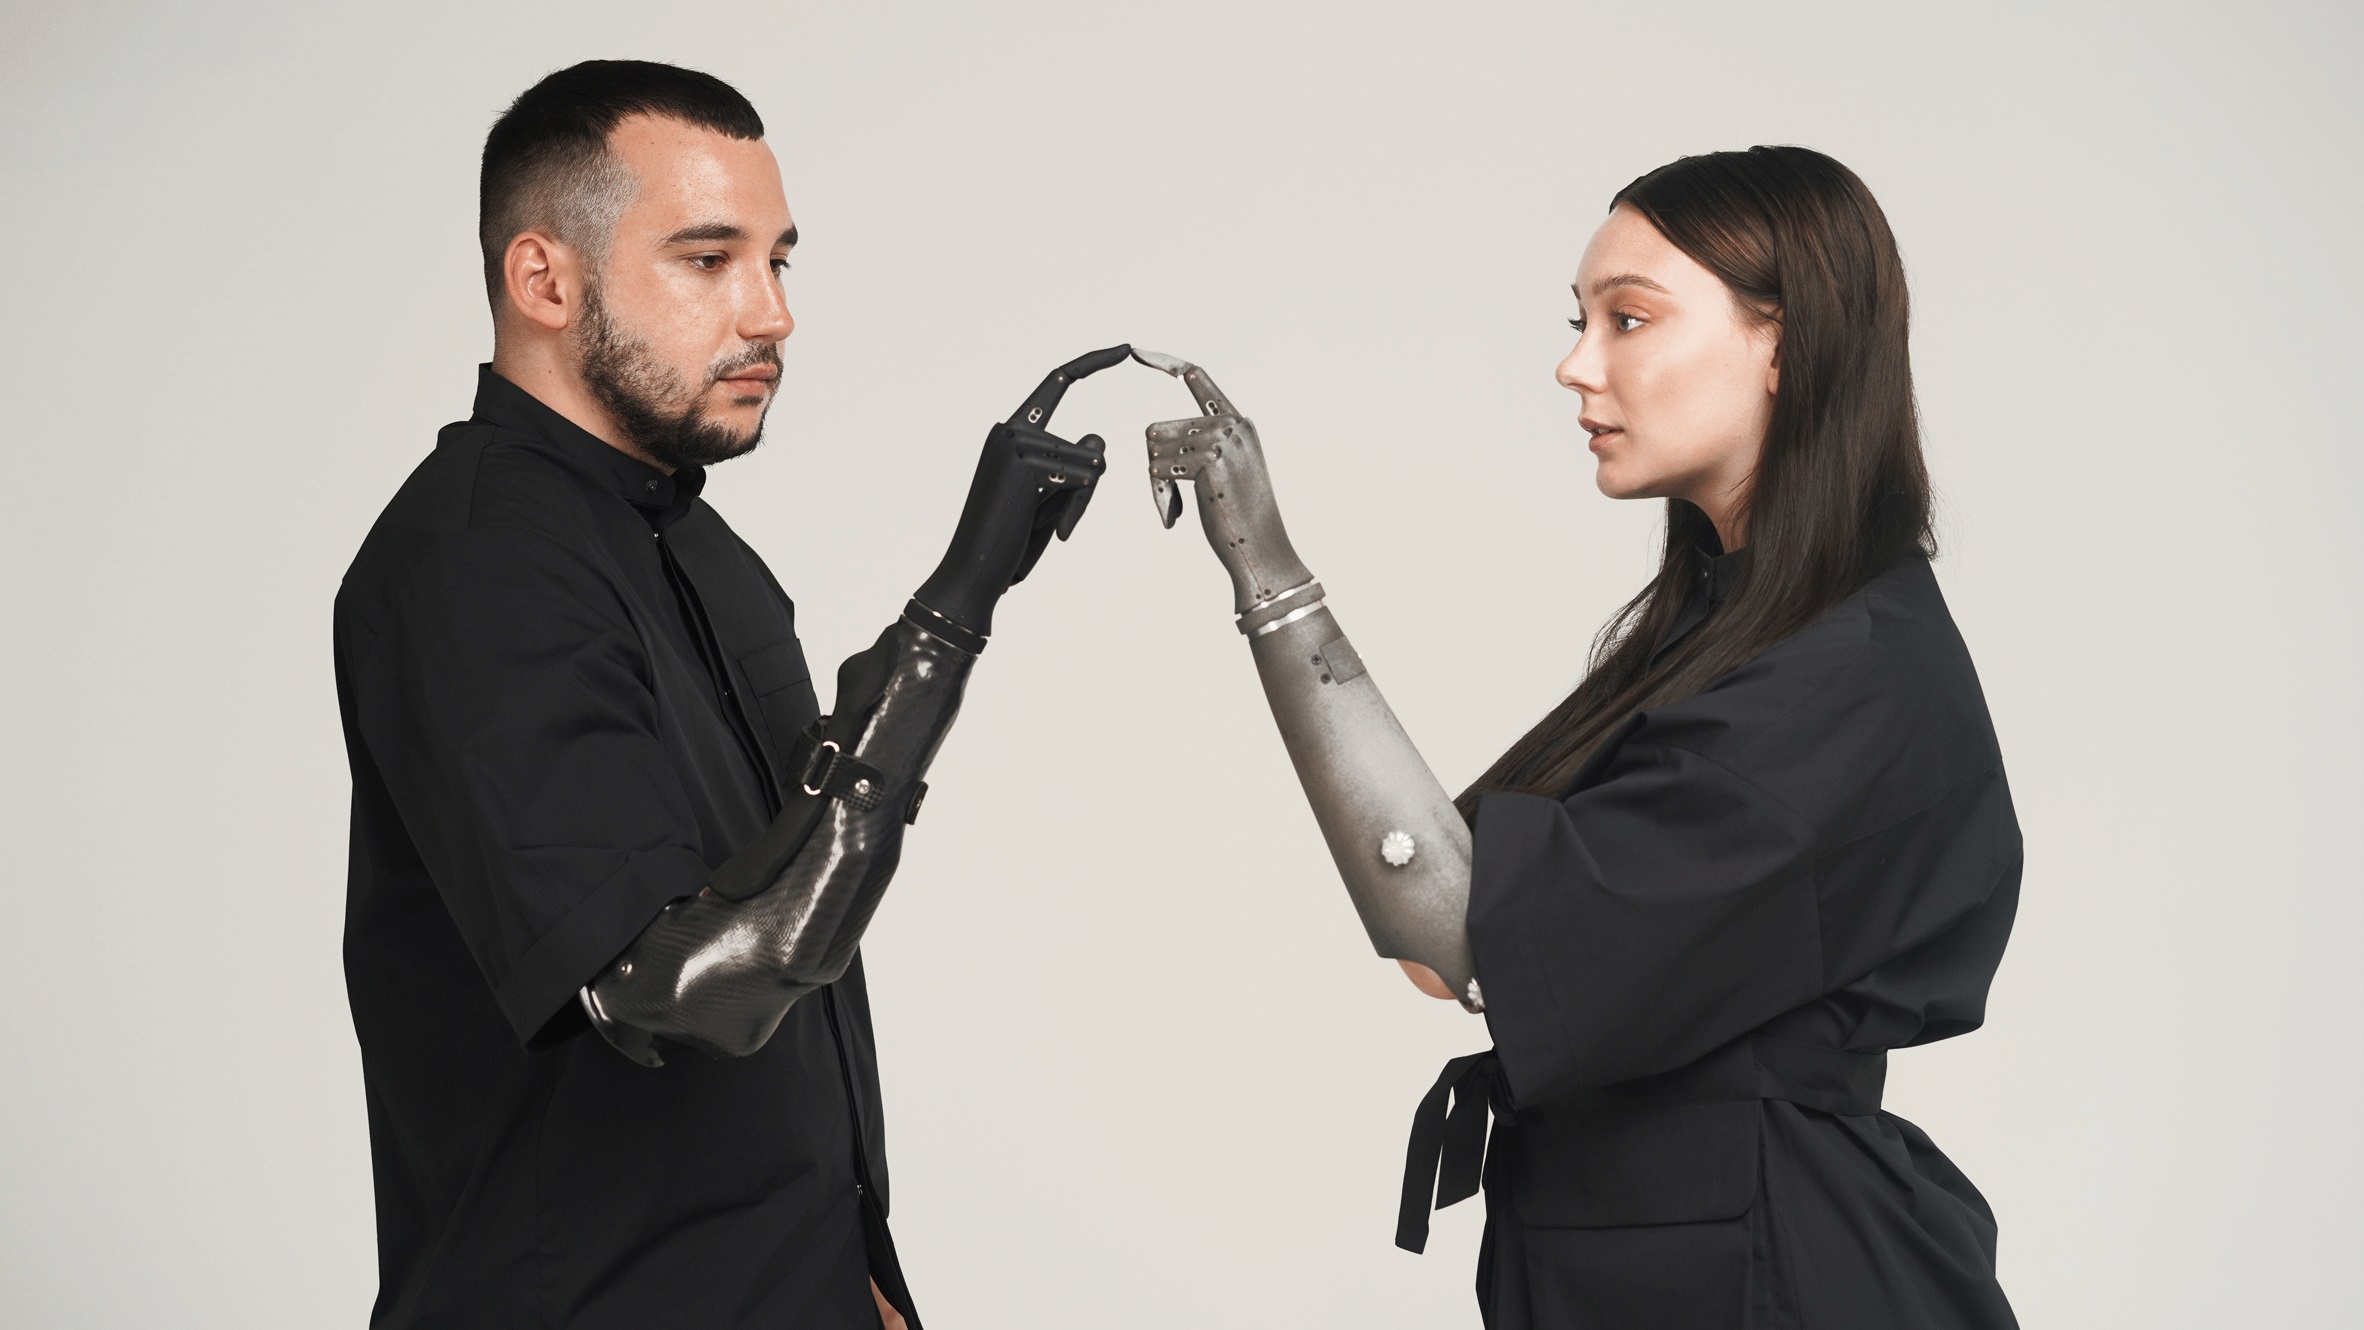 Ukrainian startup Esper Hand prosthetic robotic arm is recognized as one of the best inventions of 2022 and made the cover of Time